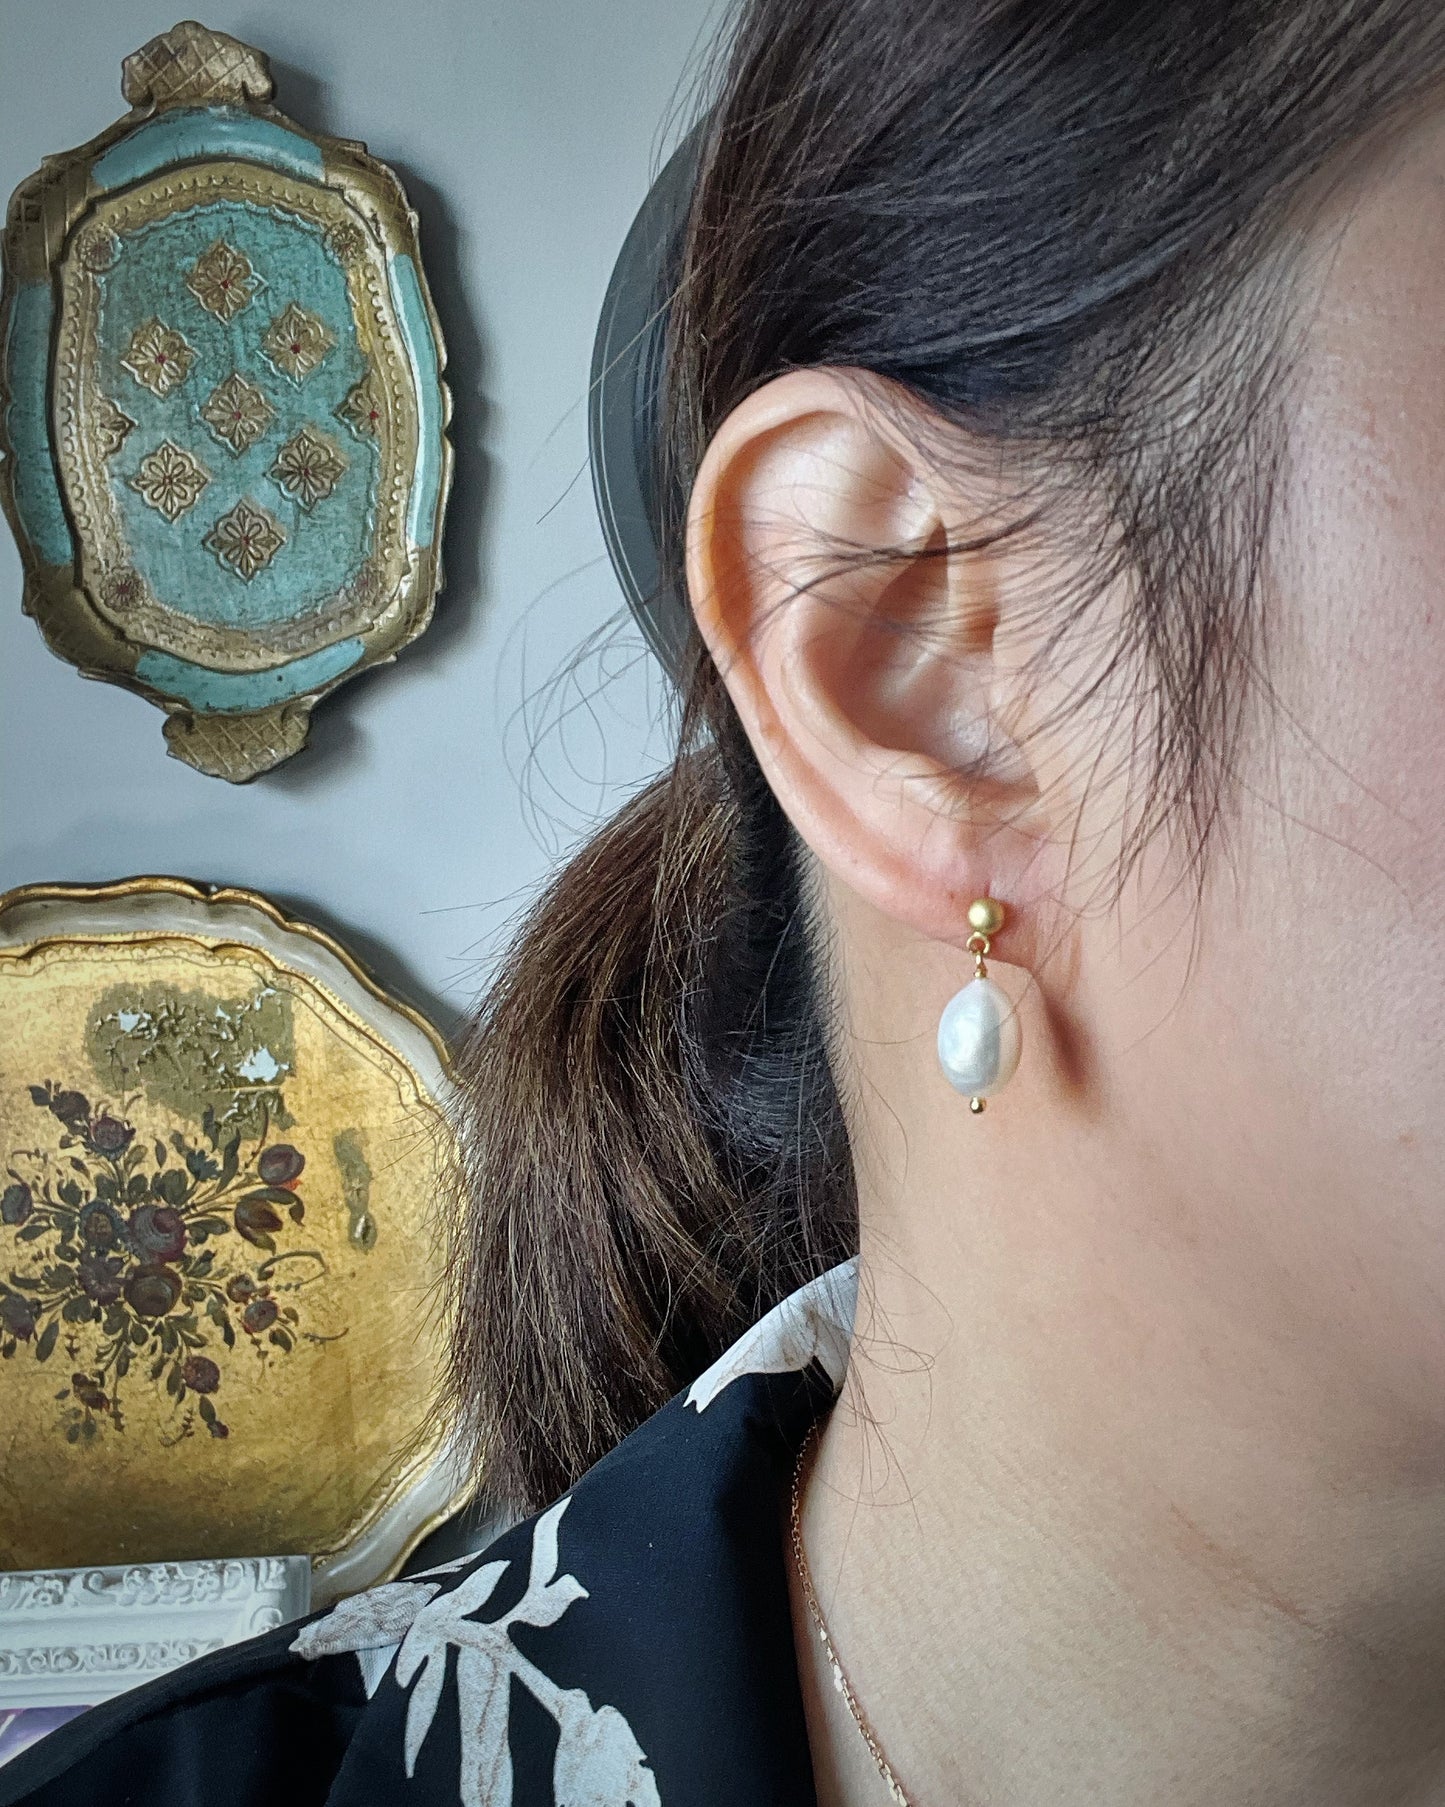 My first baroque pearl earrings